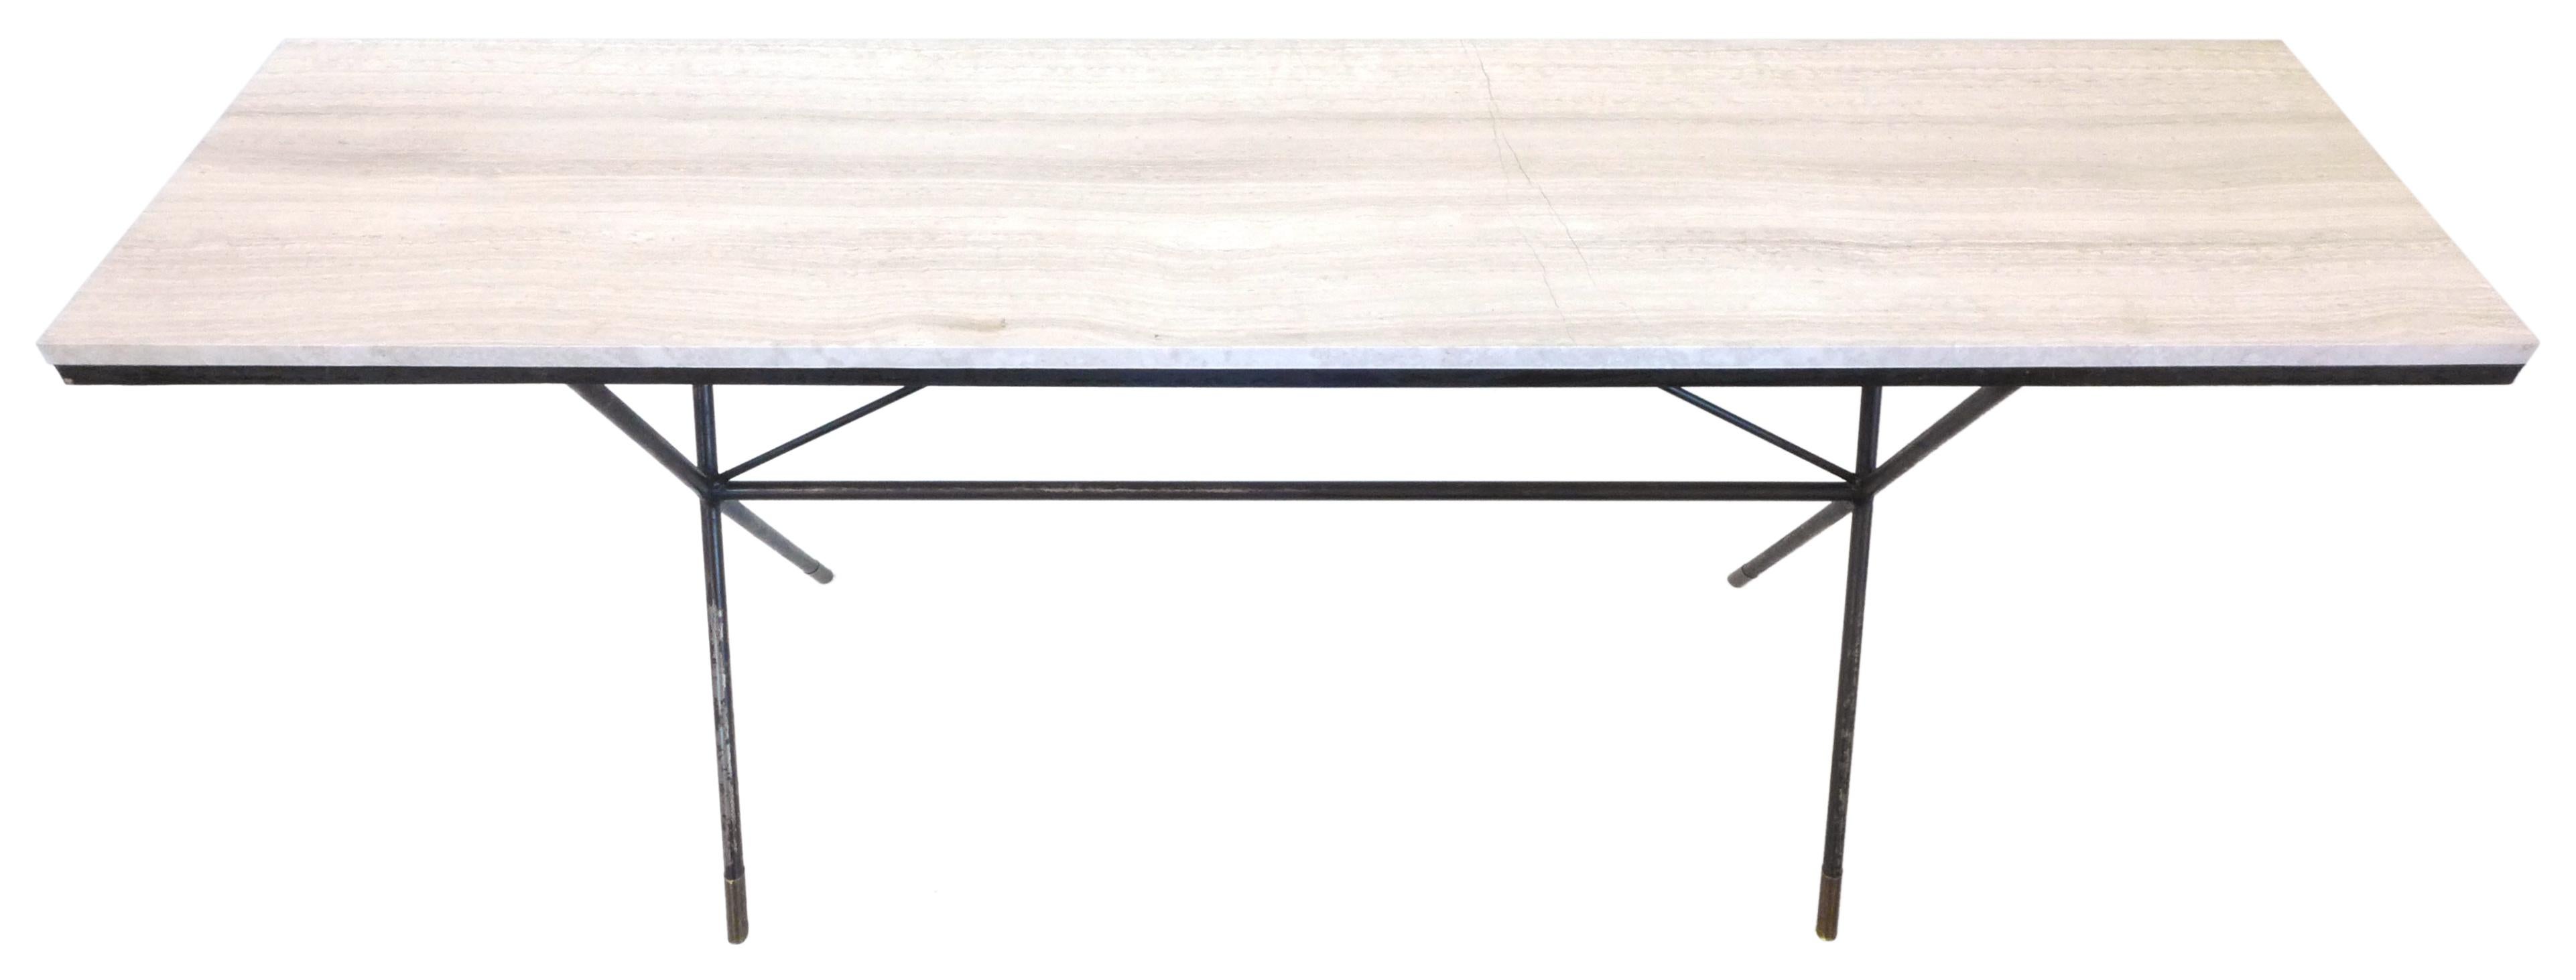 A fantastic travertine and wrought iron console table. An elegant, mottled-black, architectural base with x-brace legs, radiating cross-stretchers, and brass-capped feet topped with a contemporary, subtly-striated, oatmeal travertine top. Great